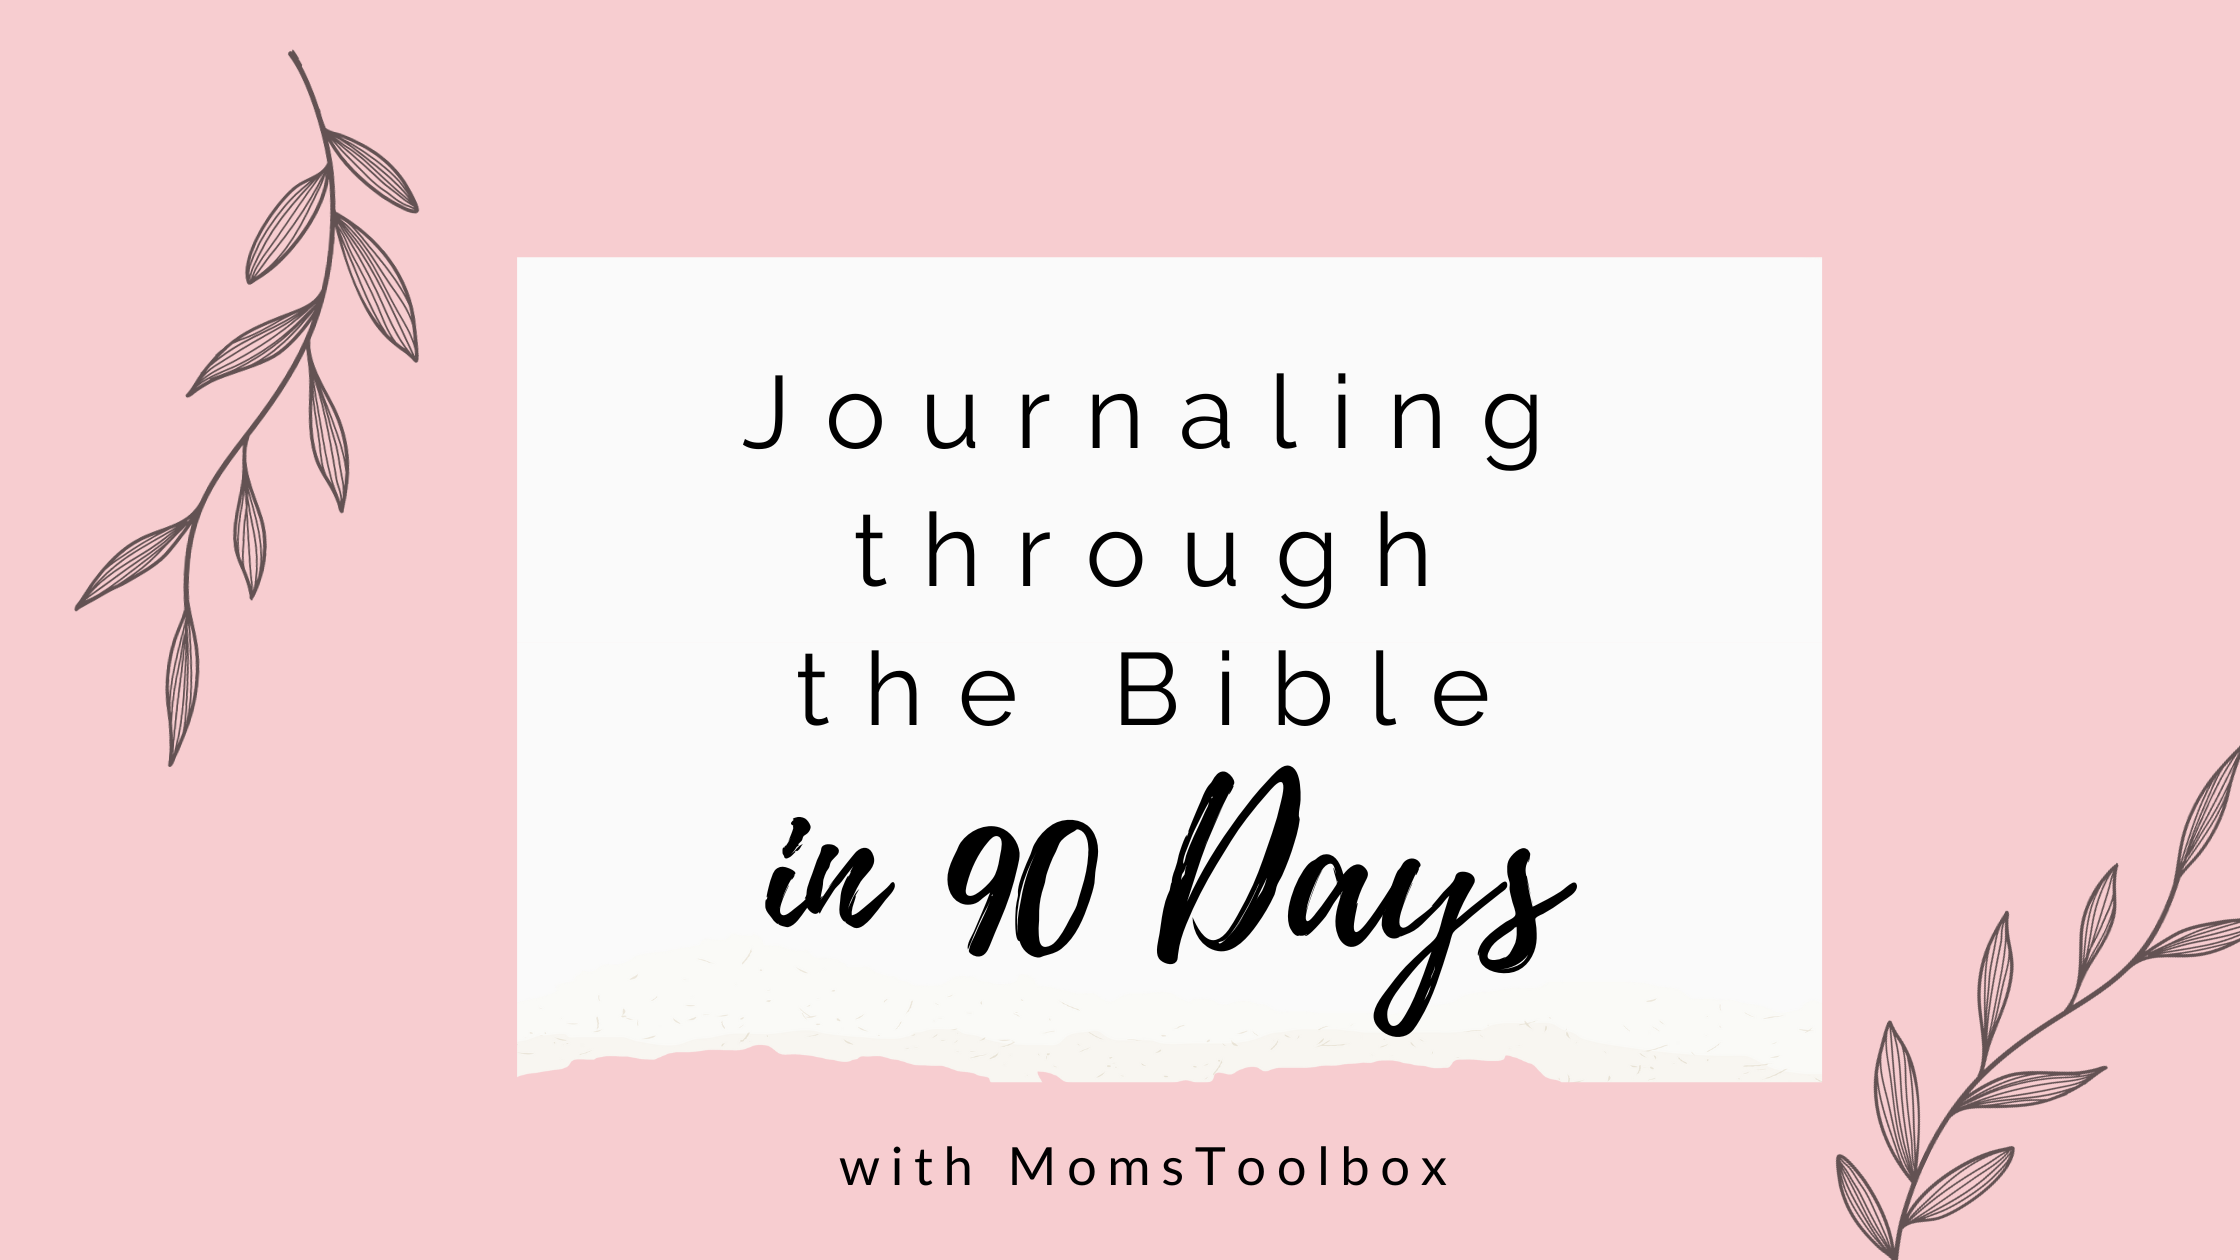 Journaling through the Bible in 90 days: Day 13